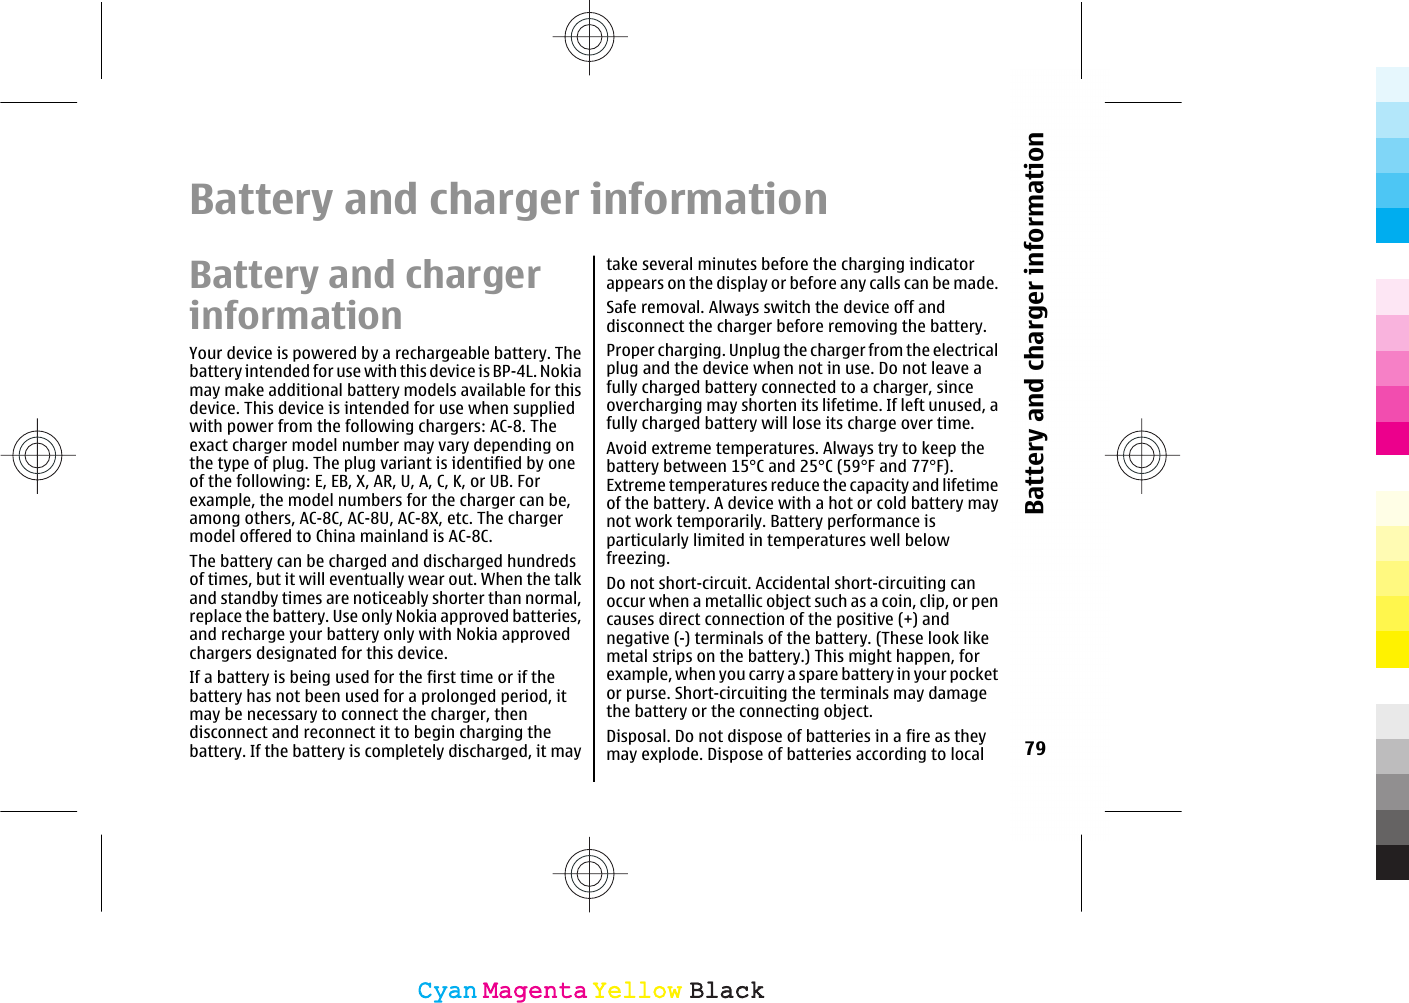 Battery and charger informationBattery and chargerinformationYour device is powered by a rechargeable battery. Thebattery intended for use with this device is BP-4L. Nokiamay make additional battery models available for thisdevice. This device is intended for use when suppliedwith power from the following chargers: AC-8. Theexact charger model number may vary depending onthe type of plug. The plug variant is identified by oneof the following: E, EB, X, AR, U, A, C, K, or UB. Forexample, the model numbers for the charger can be,among others, AC-8C, AC-8U, AC-8X, etc. The chargermodel offered to China mainland is AC-8C.The battery can be charged and discharged hundredsof times, but it will eventually wear out. When the talkand standby times are noticeably shorter than normal,replace the battery. Use only Nokia approved batteries,and recharge your battery only with Nokia approvedchargers designated for this device.If a battery is being used for the first time or if thebattery has not been used for a prolonged period, itmay be necessary to connect the charger, thendisconnect and reconnect it to begin charging thebattery. If the battery is completely discharged, it maytake several minutes before the charging indicatorappears on the display or before any calls can be made.Safe removal. Always switch the device off anddisconnect the charger before removing the battery.Proper charging. Unplug the charger from the electricalplug and the device when not in use. Do not leave afully charged battery connected to a charger, sinceovercharging may shorten its lifetime. If left unused, afully charged battery will lose its charge over time.Avoid extreme temperatures. Always try to keep thebattery between 15°C and 25°C (59°F and 77°F).Extreme temperatures reduce the capacity and lifetimeof the battery. A device with a hot or cold battery maynot work temporarily. Battery performance isparticularly limited in temperatures well belowfreezing.Do not short-circuit. Accidental short-circuiting canoccur when a metallic object such as a coin, clip, or pencauses direct connection of the positive (+) andnegative (-) terminals of the battery. (These look likemetal strips on the battery.) This might happen, forexample, when you carry a spare battery in your pocketor purse. Short-circuiting the terminals may damagethe battery or the connecting object.Disposal. Do not dispose of batteries in a fire as theymay explode. Dispose of batteries according to local 79Battery and charger informationCyanCyanMagentaMagentaYellowYellowBlackBlack